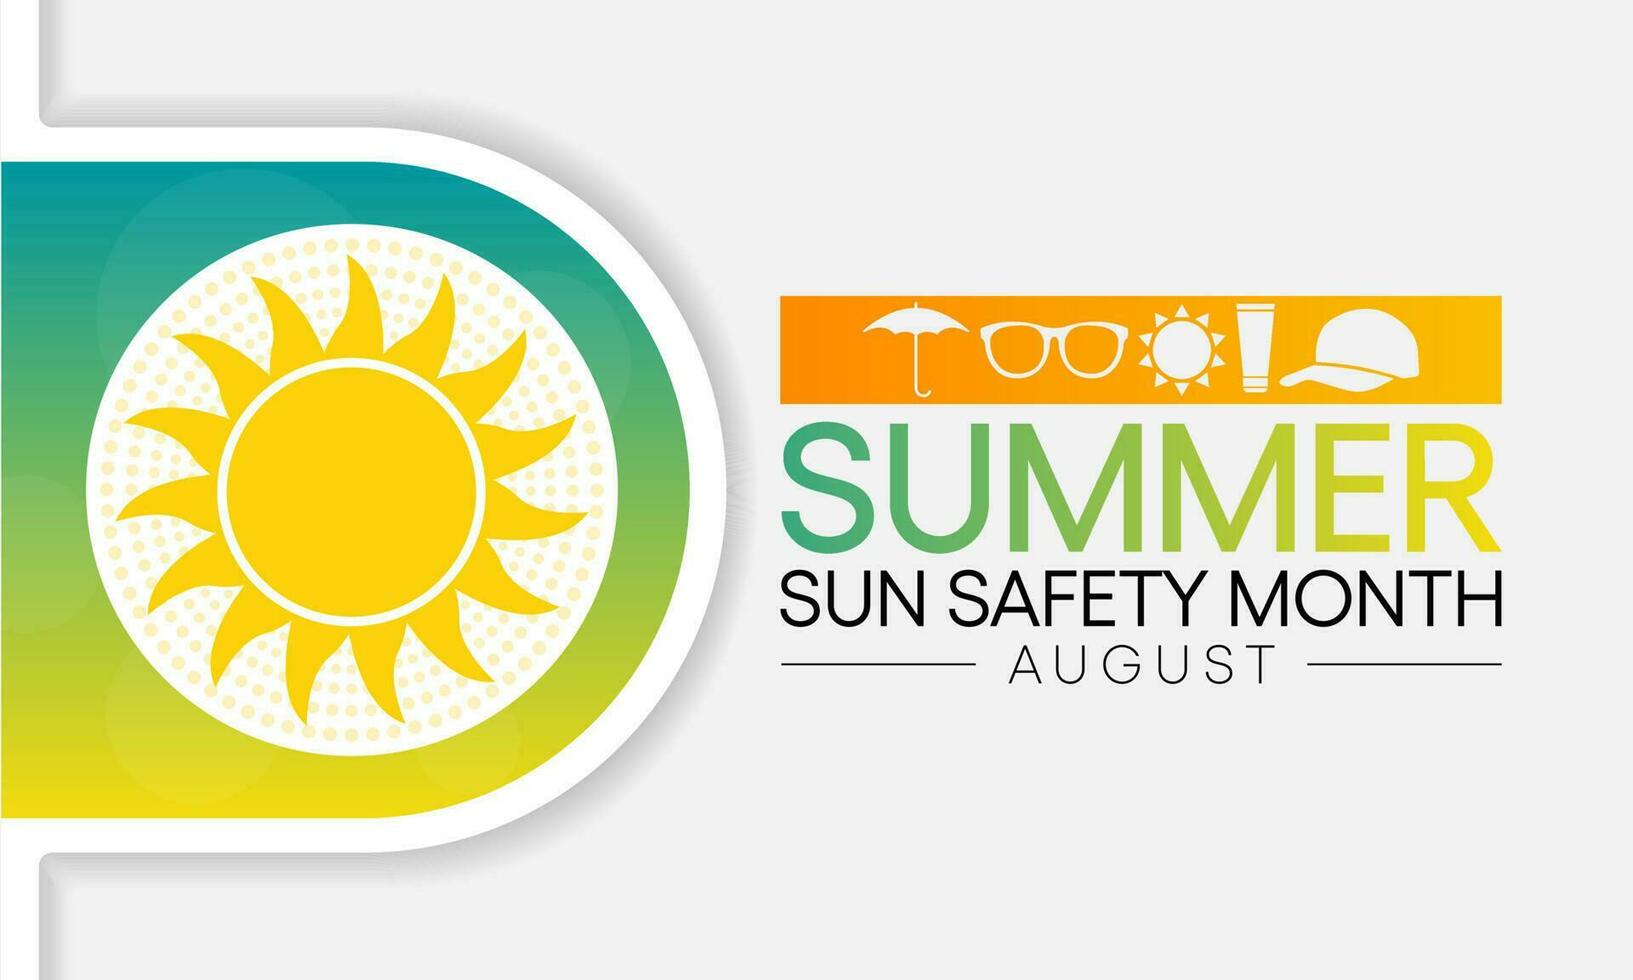 Summer sun safety month is observed every year in August, celebrated to aware about some of the damaging effects of ultraviolet UV exposure, and tips to help protect people during the summer months. vector